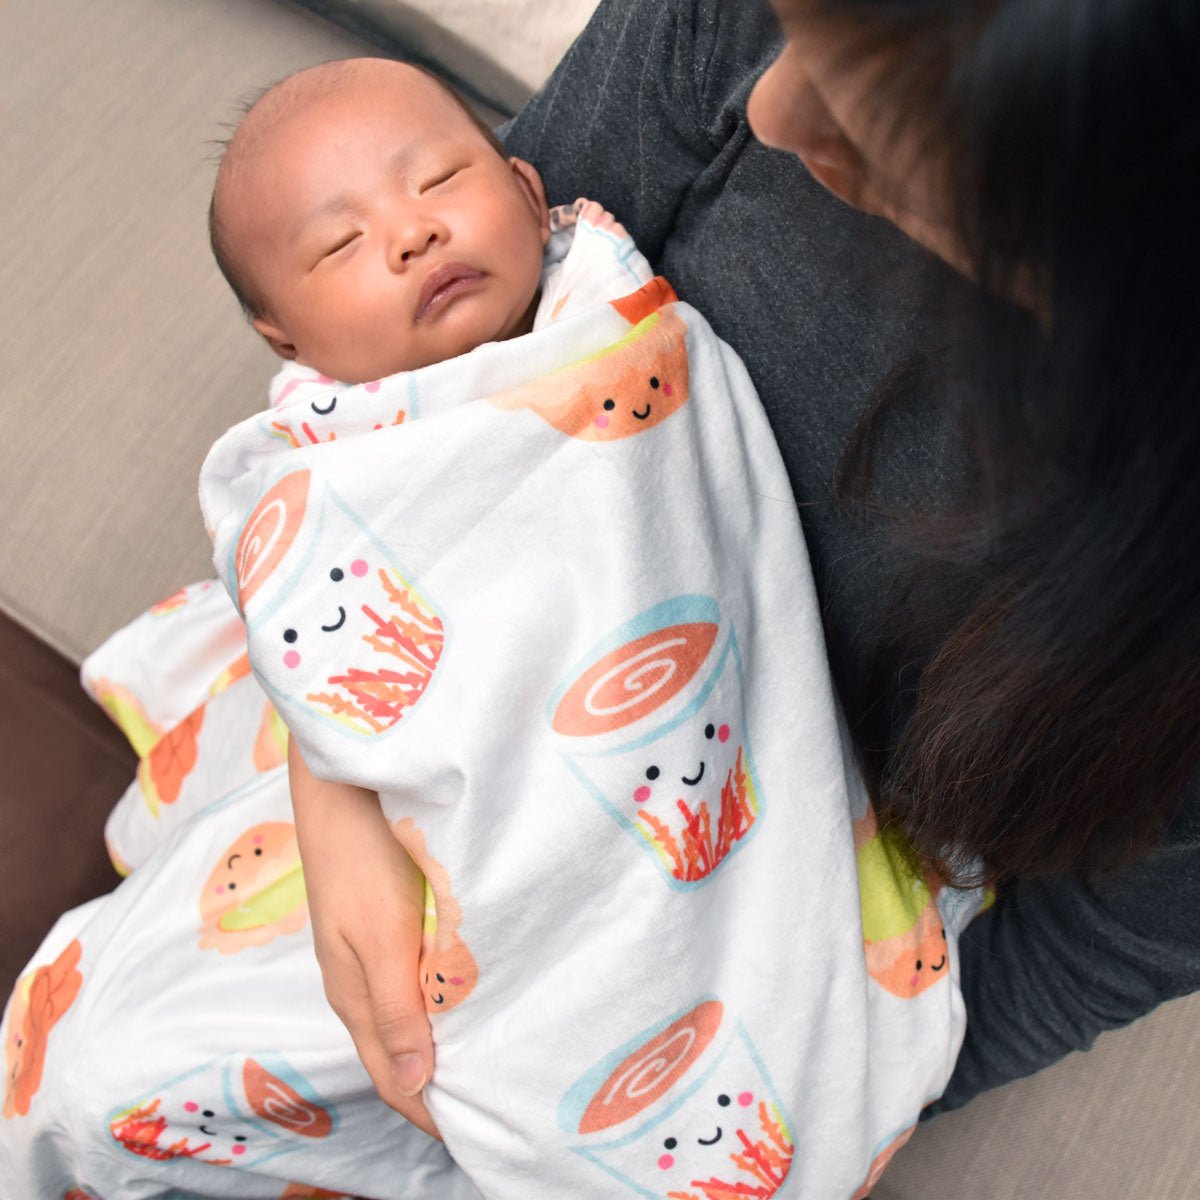 7 Easy Ways to Protect your Newborn During Cold and Flu Season